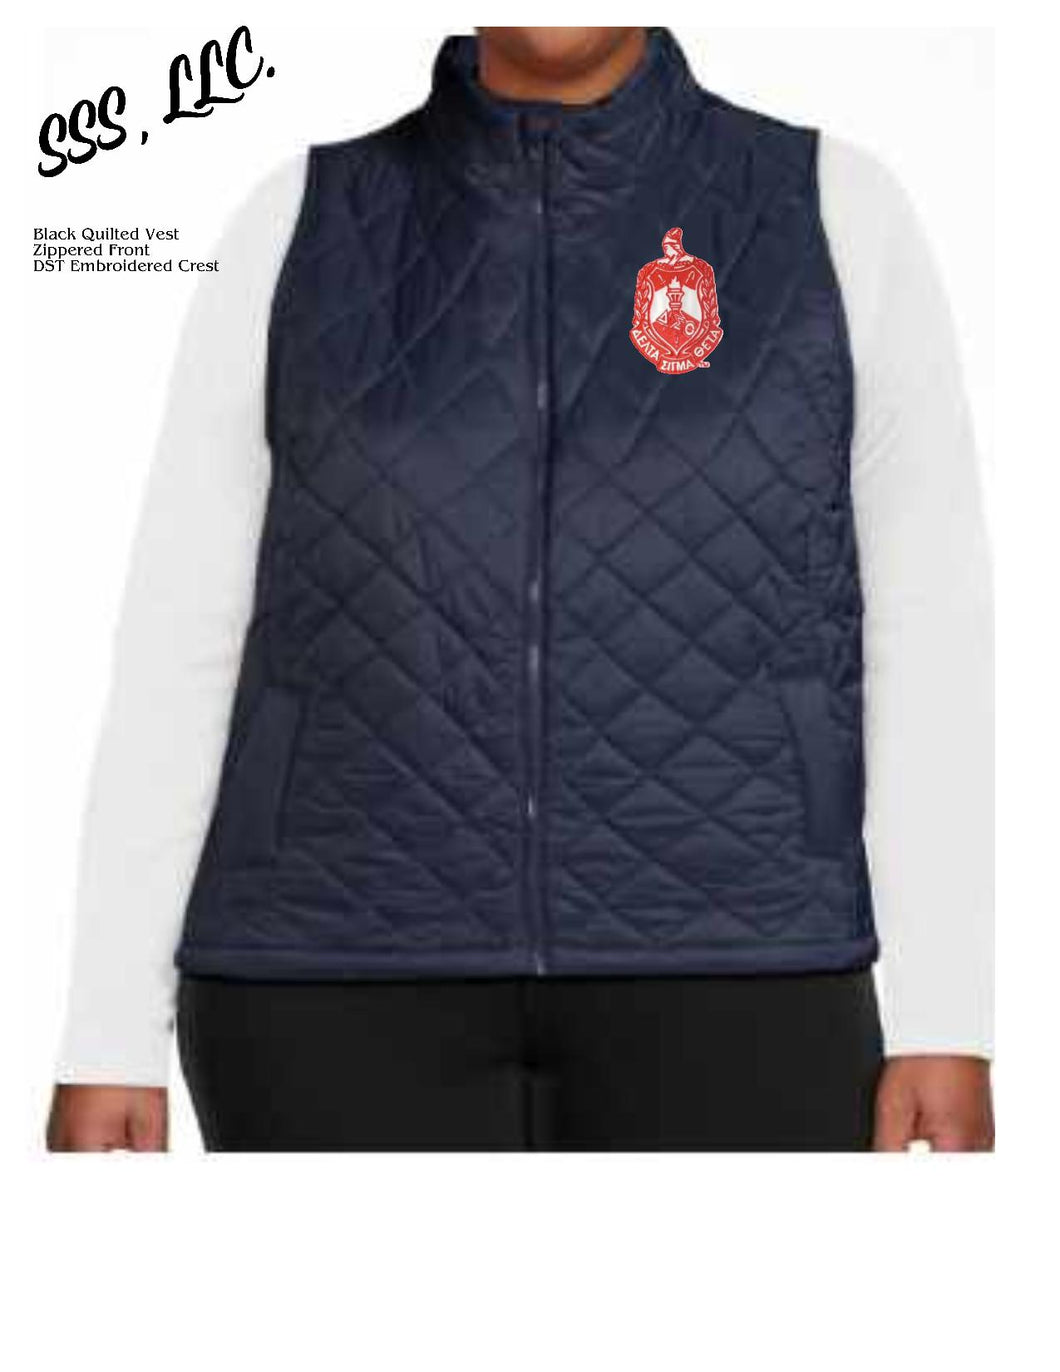 Black Woven Quilted Vest with DST Decal